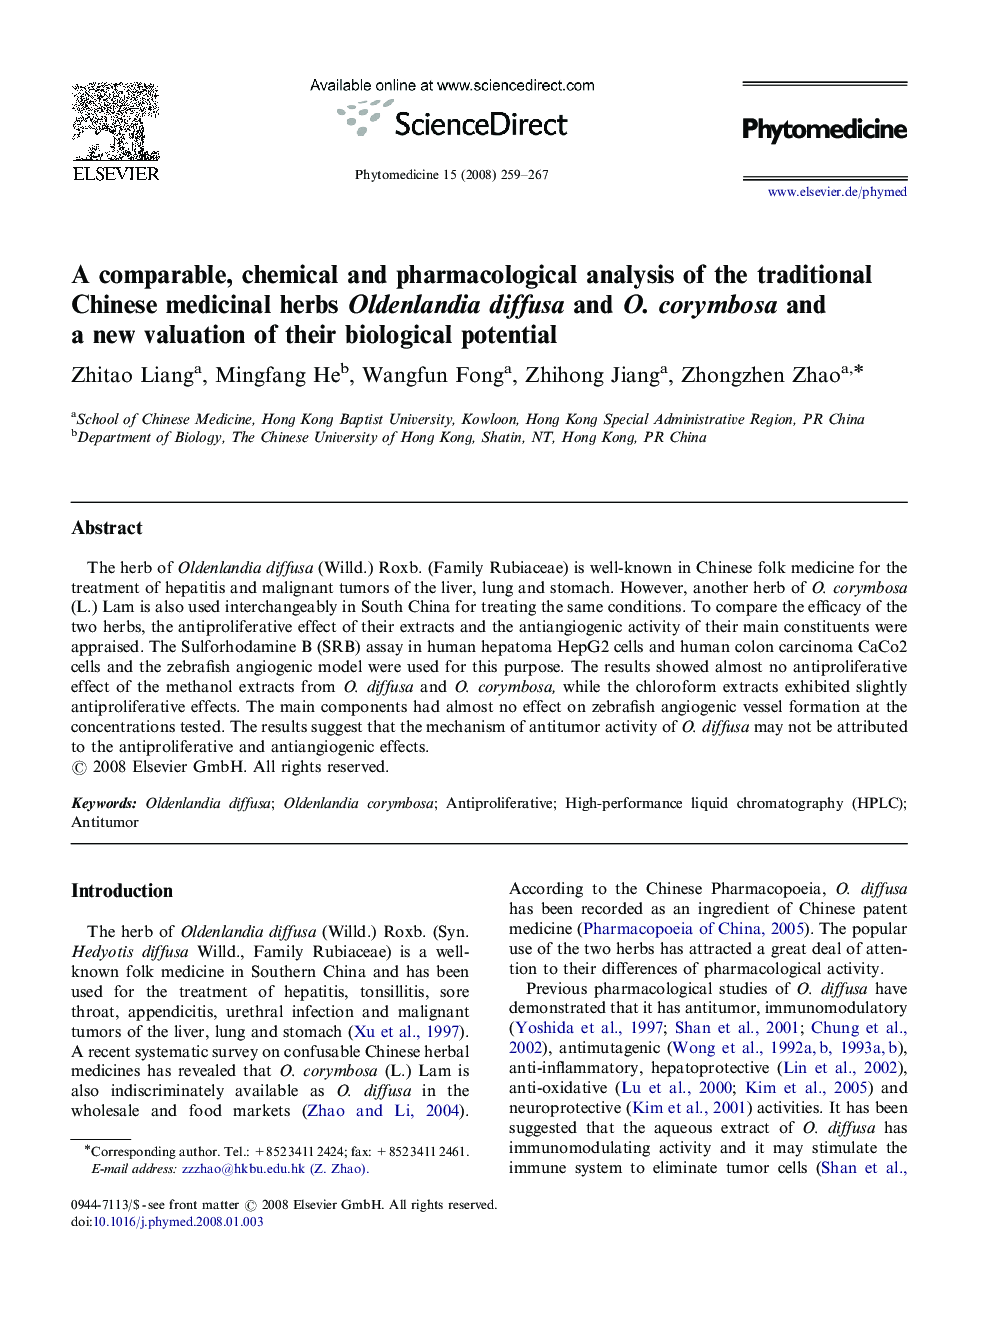 A comparable, chemical and pharmacological analysis of the traditional Chinese medicinal herbs Oldenlandia diffusa and O. corymbosa and a new valuation of their biological potential